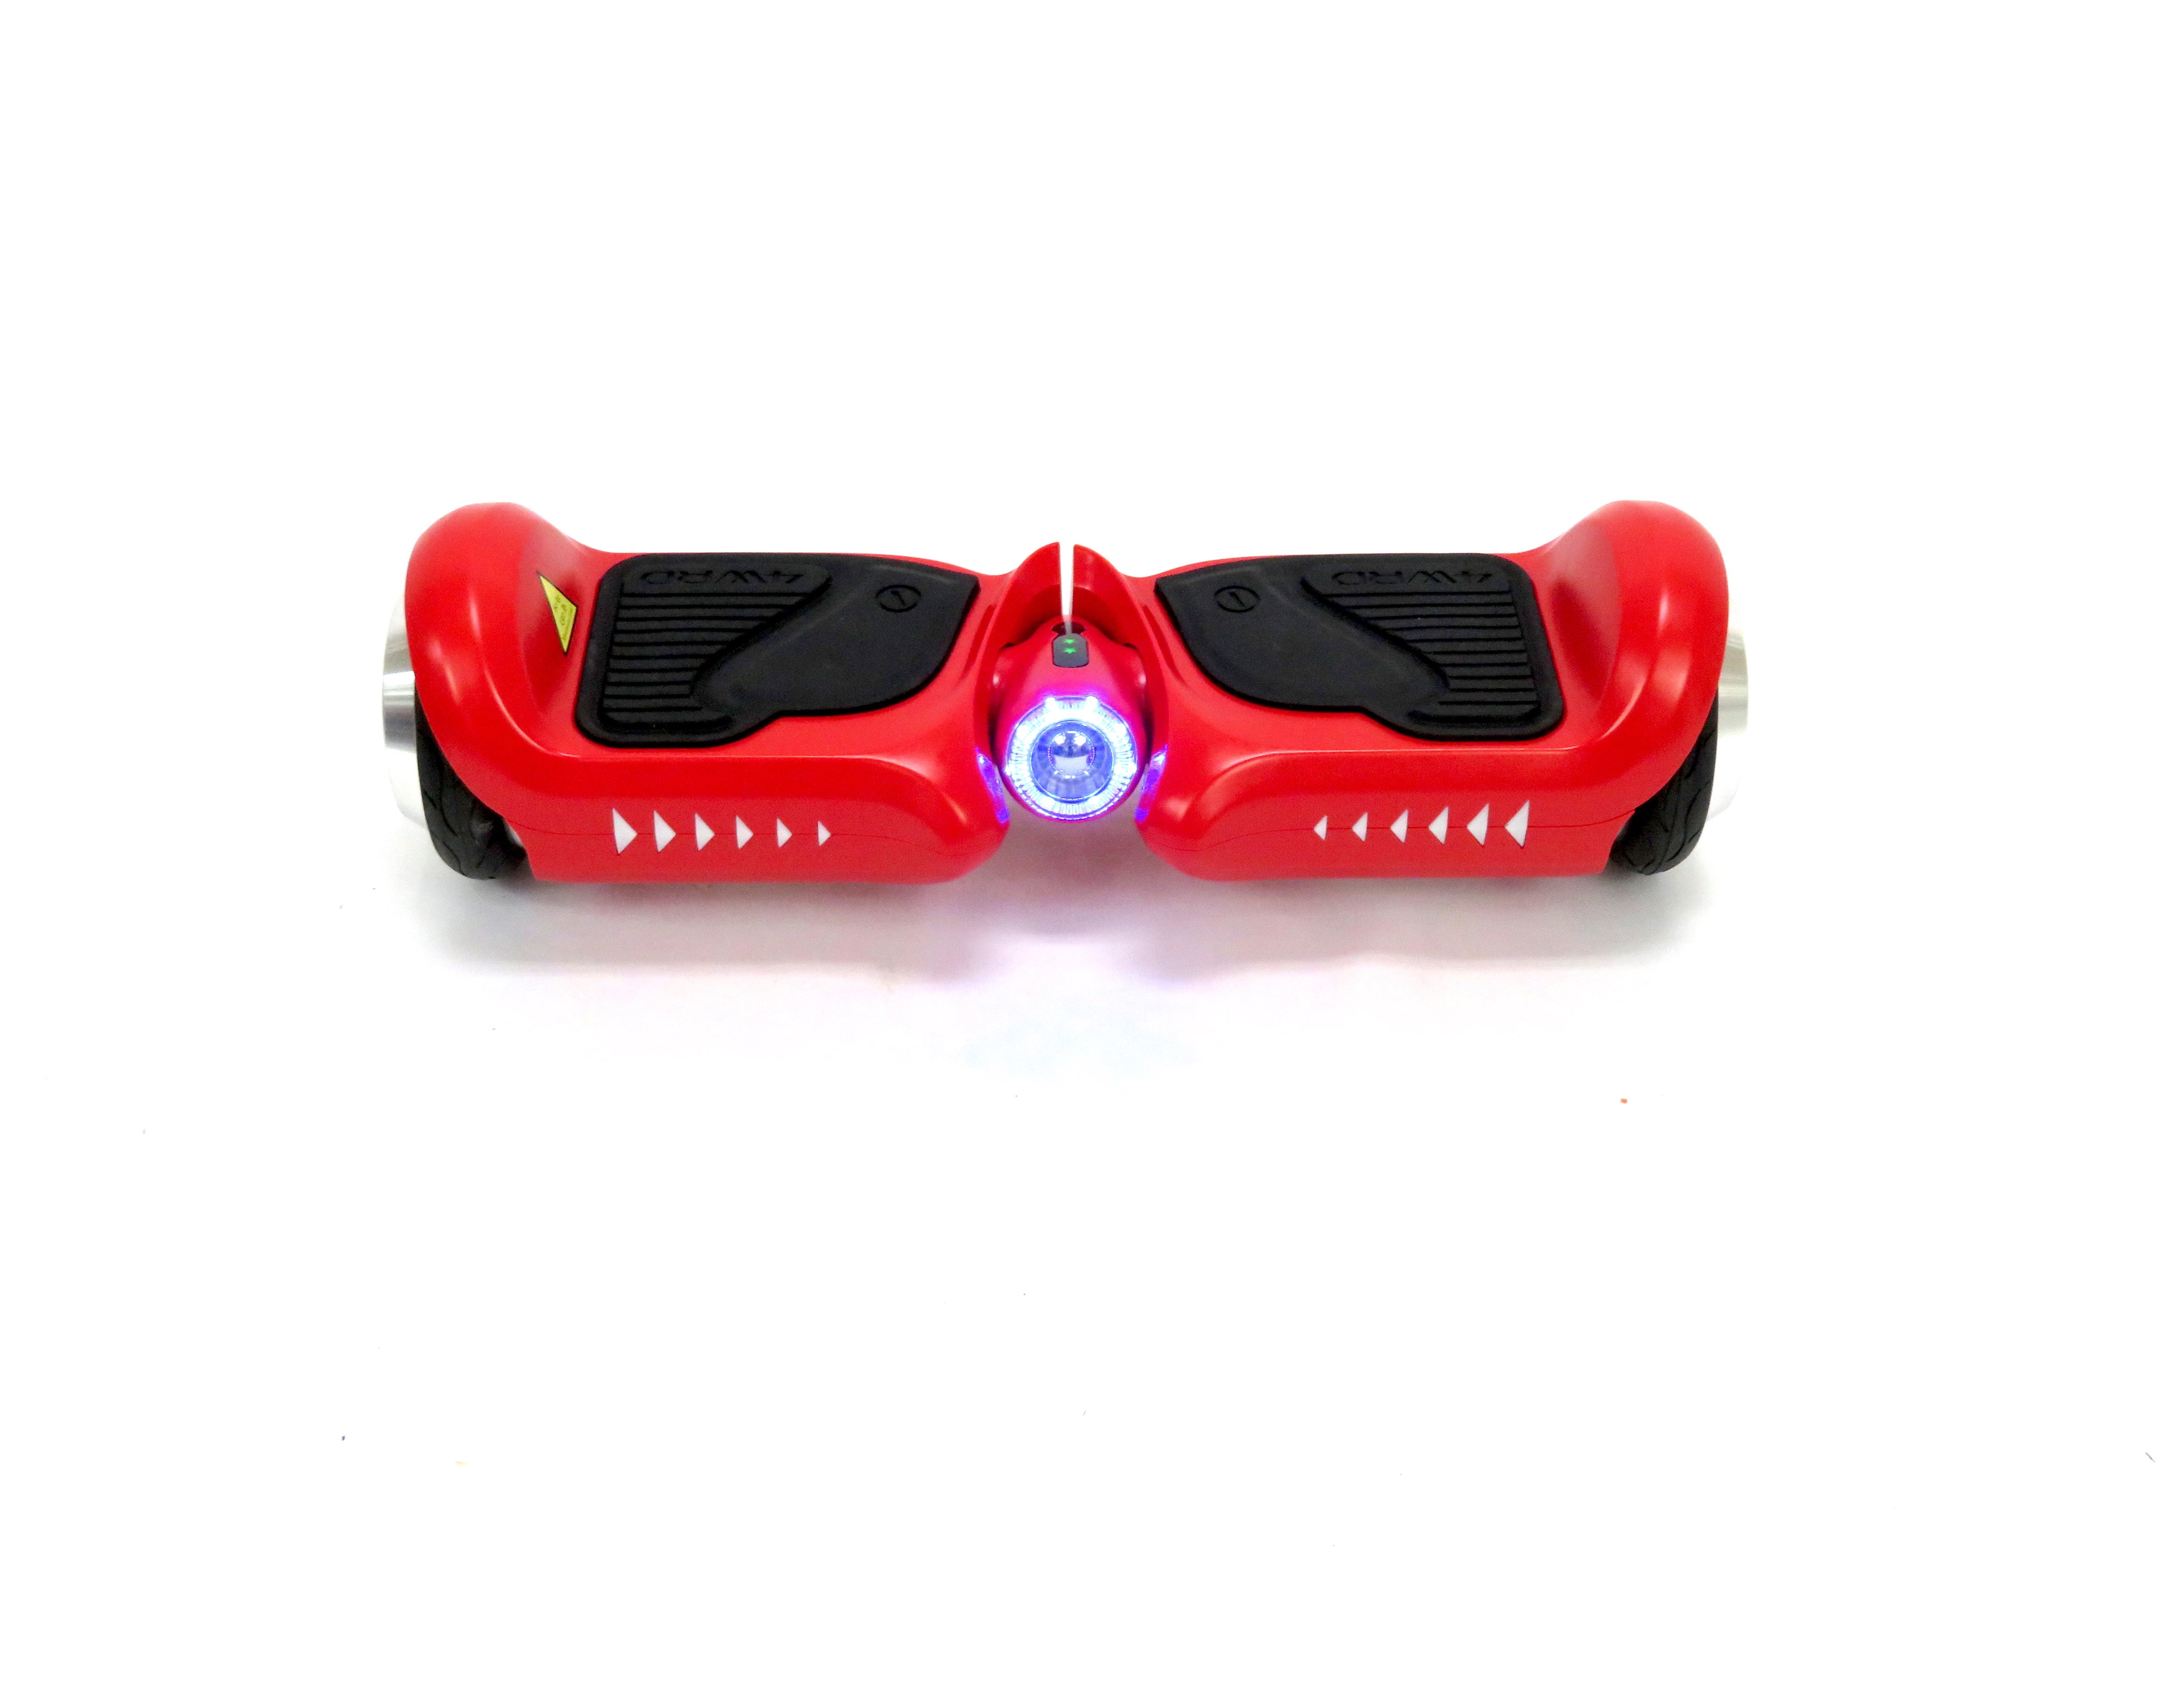 UL 4.5 Kids HoverBoard - Red